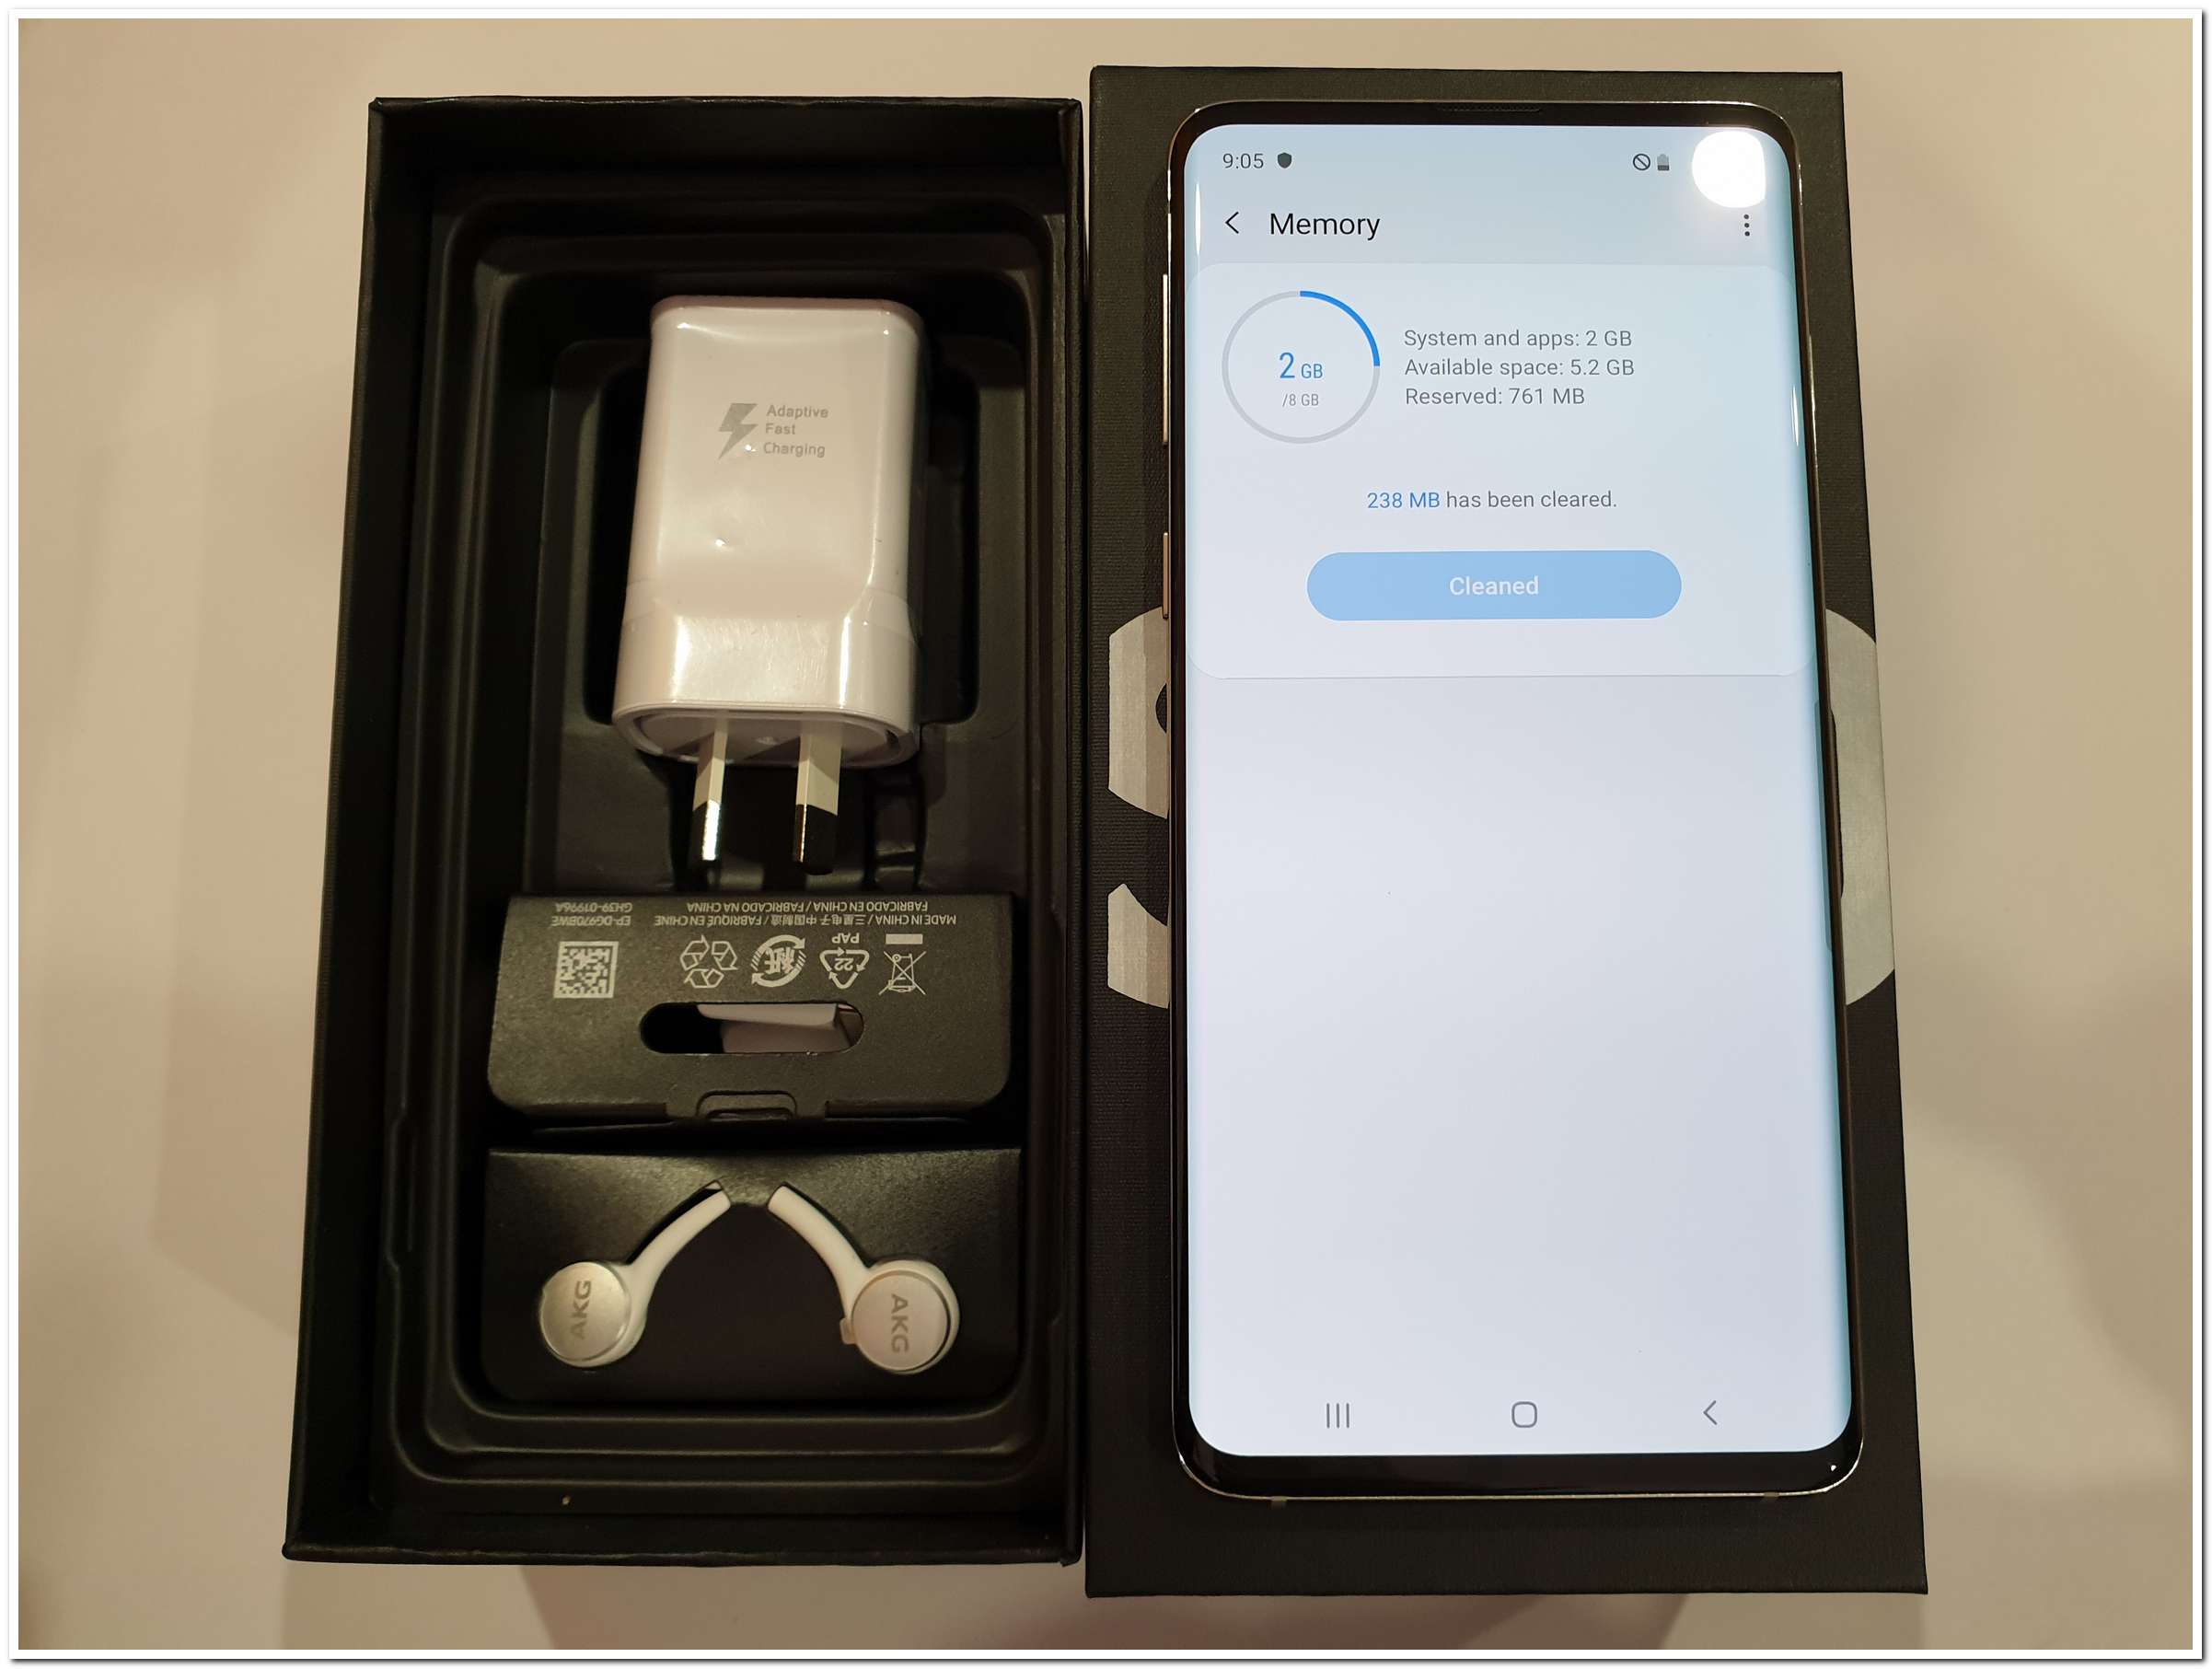 Galaxy S10 Prism White 128 GBの+stbp.com.br